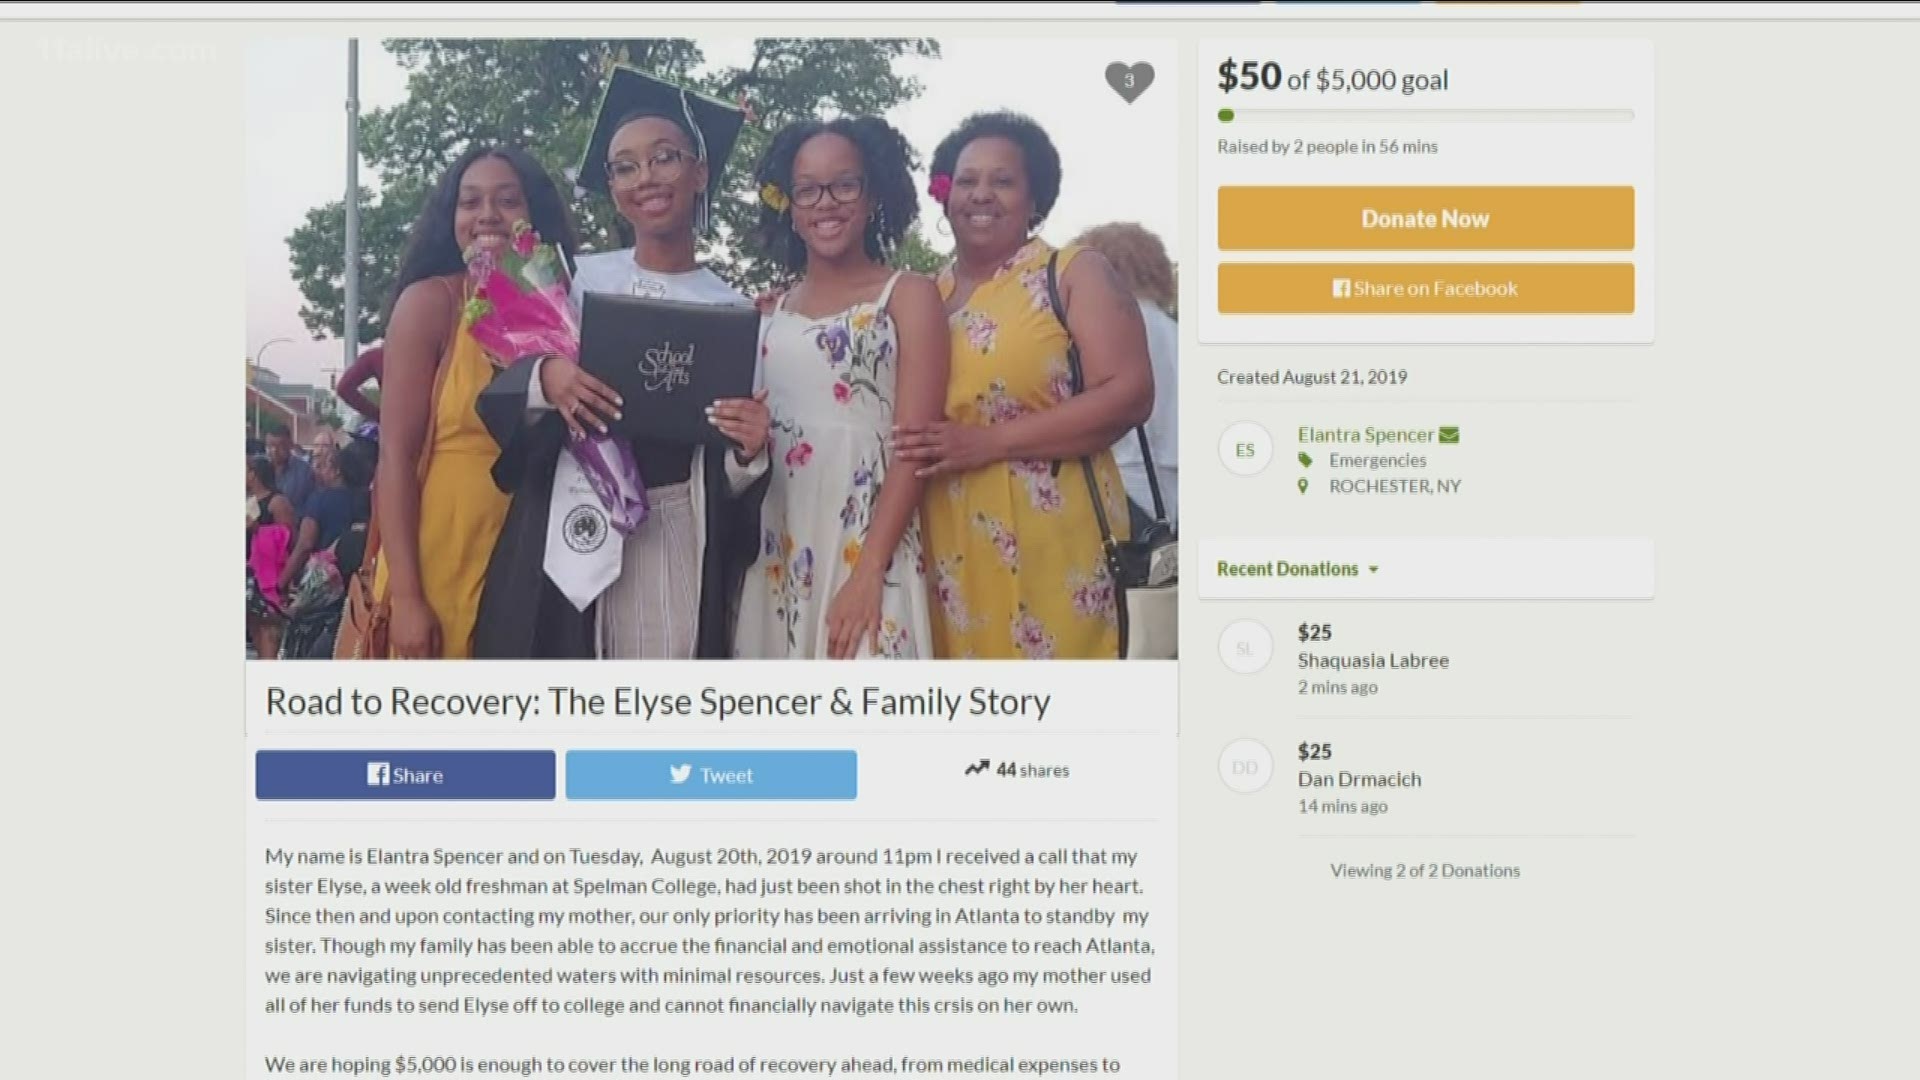 The organizer of the page, Elantra Spencer, is Elyse's sister.